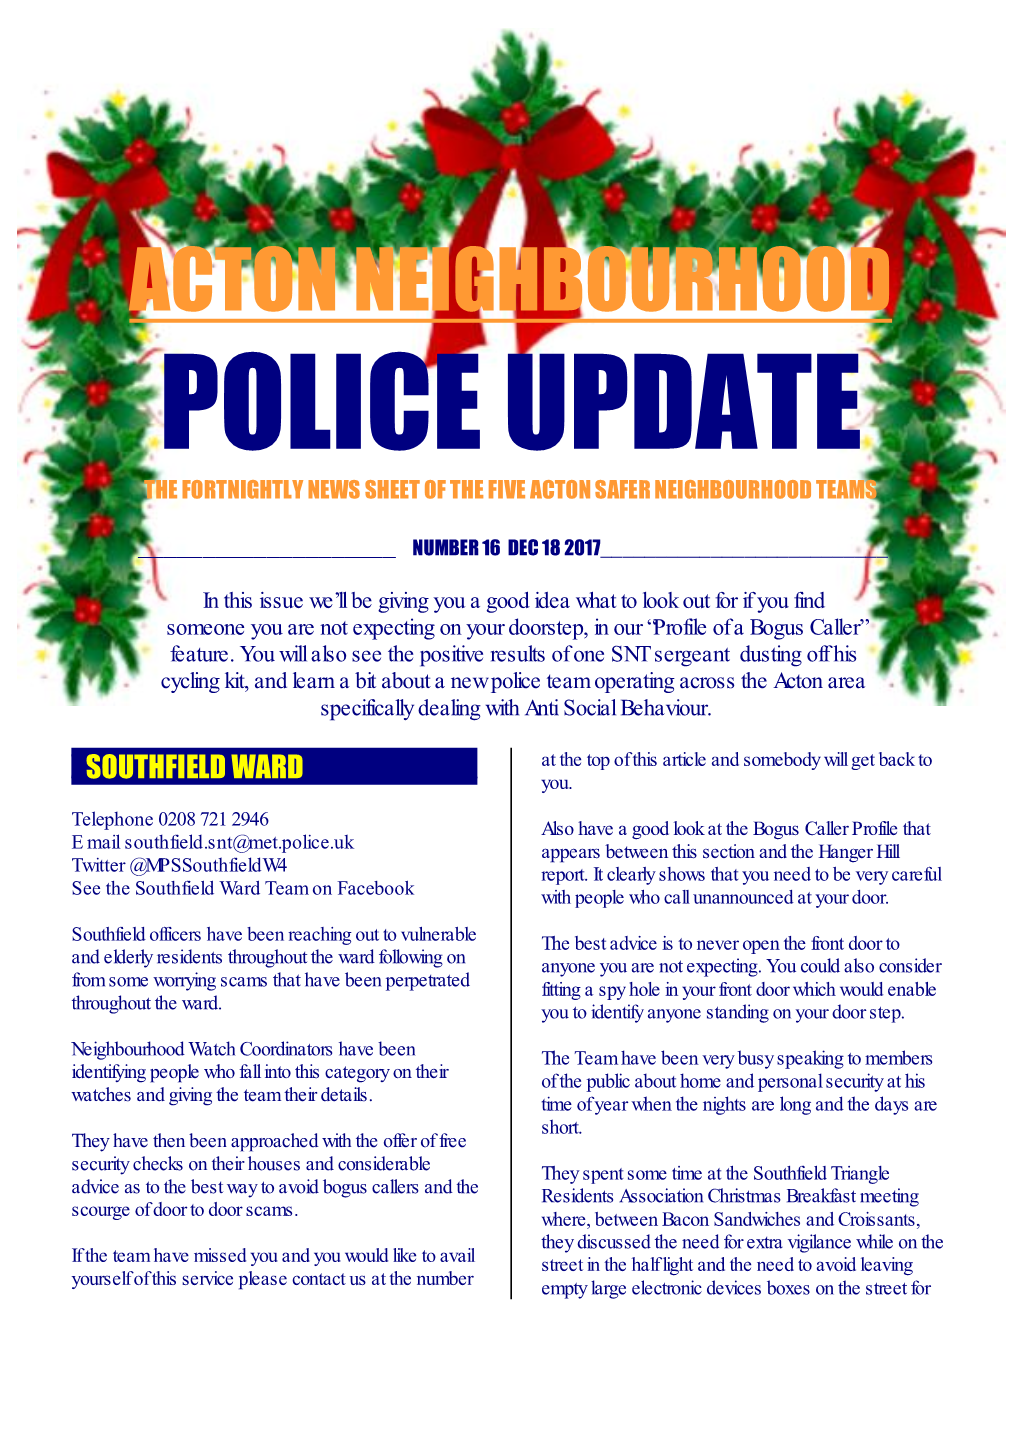 Acton Neighbourhood Police Update the Fortnightly News Sheet of the Five Acton Safer Neighbourhood Teams